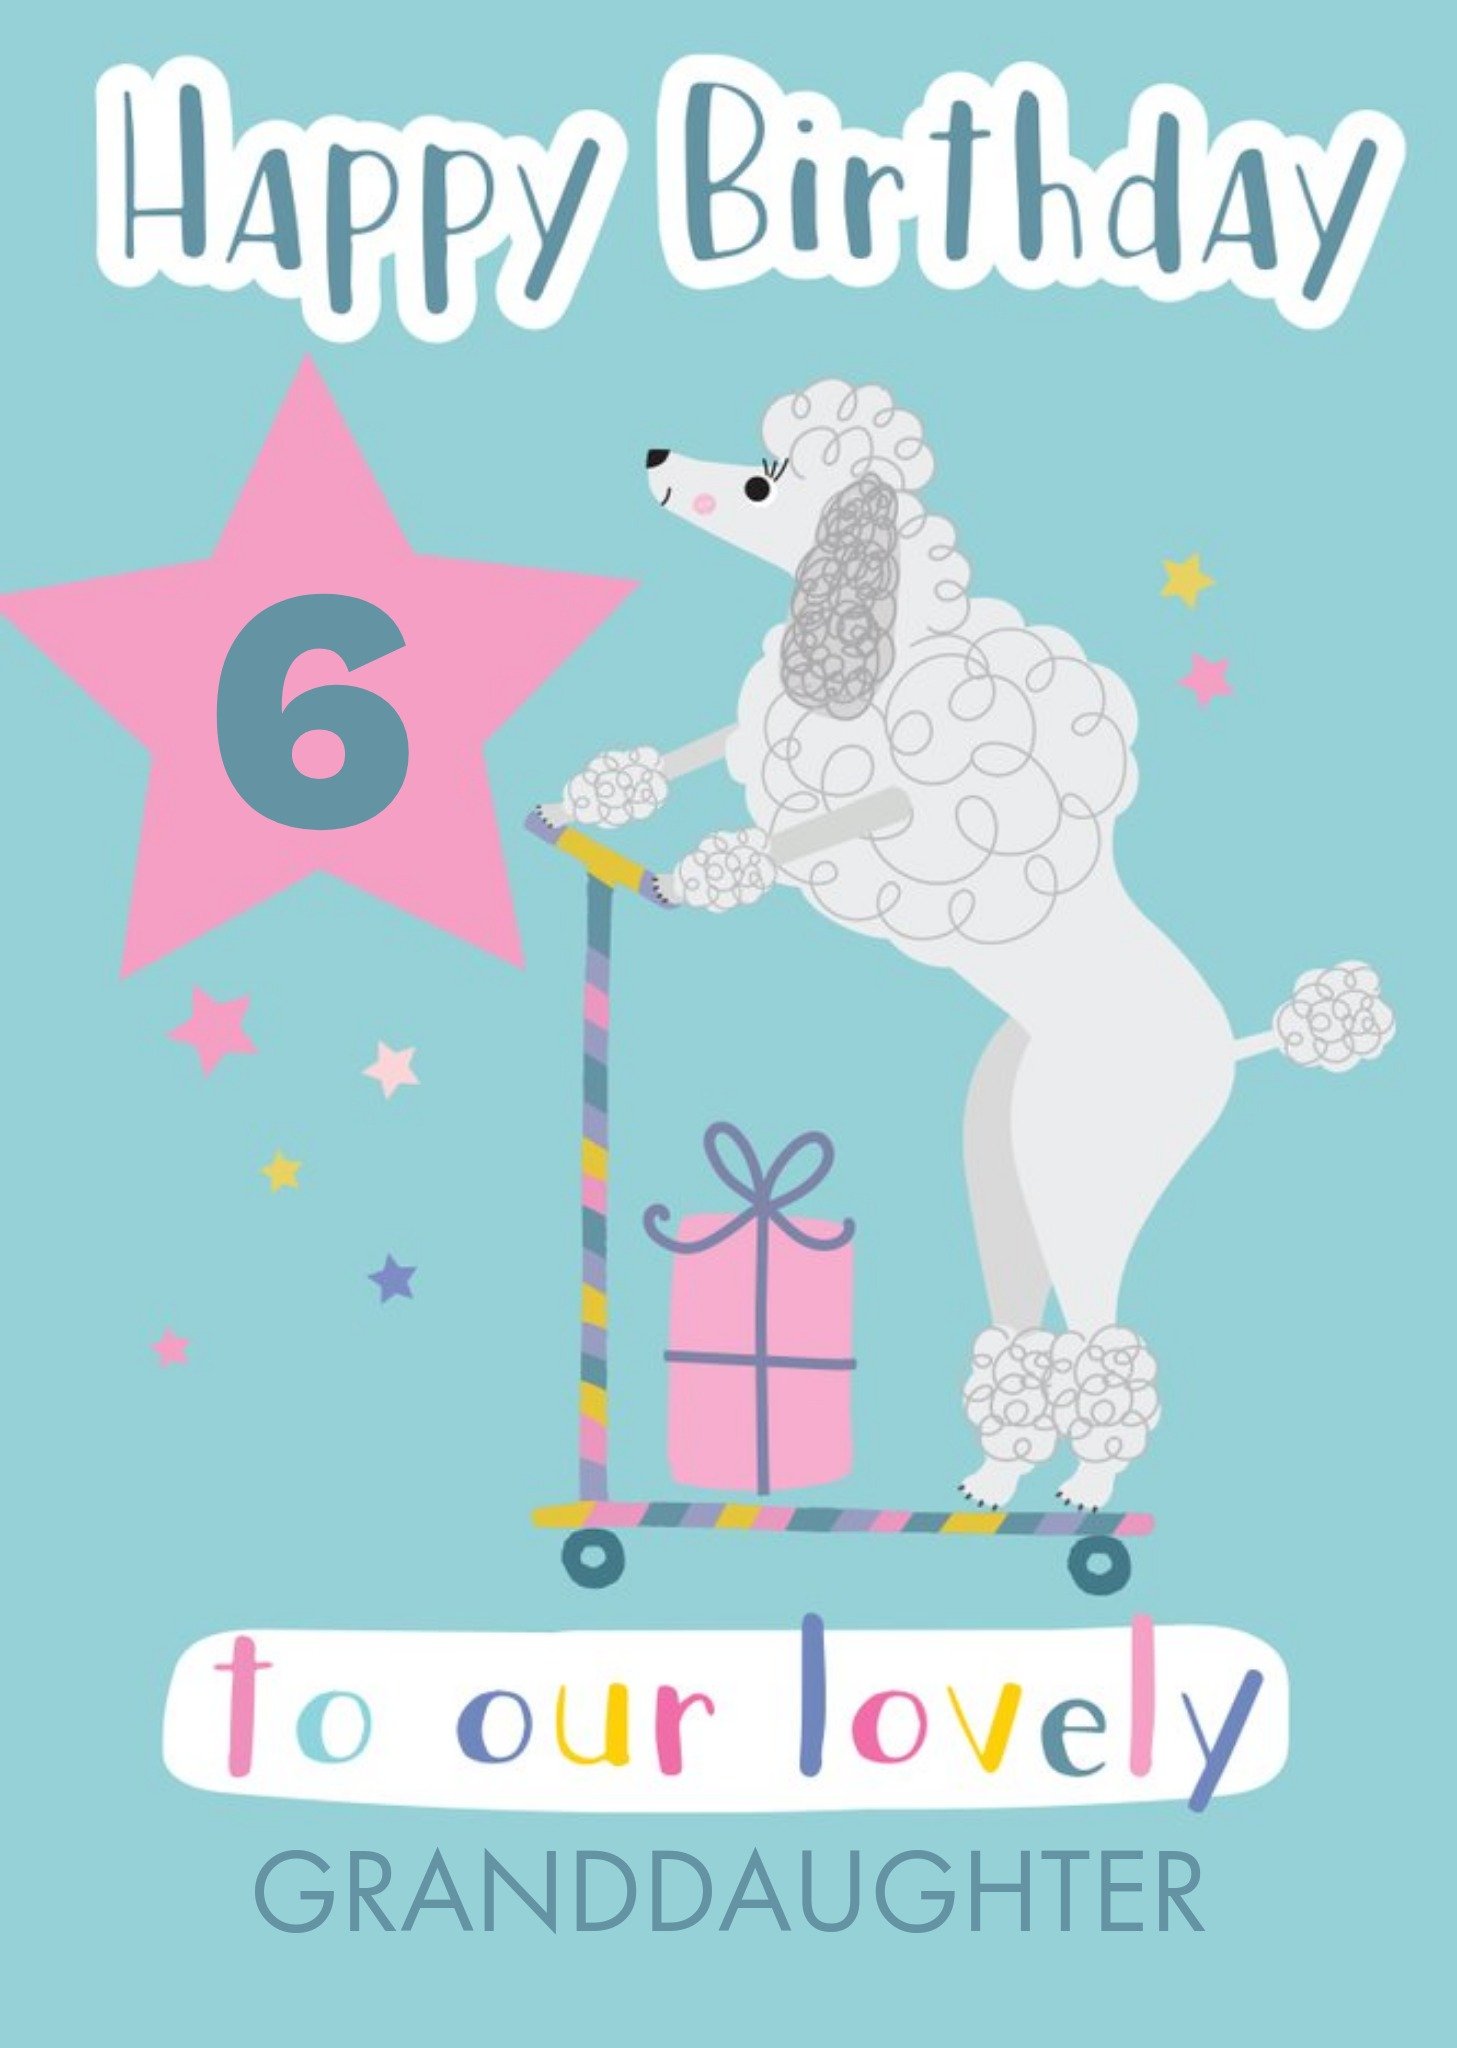 Moonpig Cute French Poodle Illustration Personalised Graddaughter Birthday Card Ecard